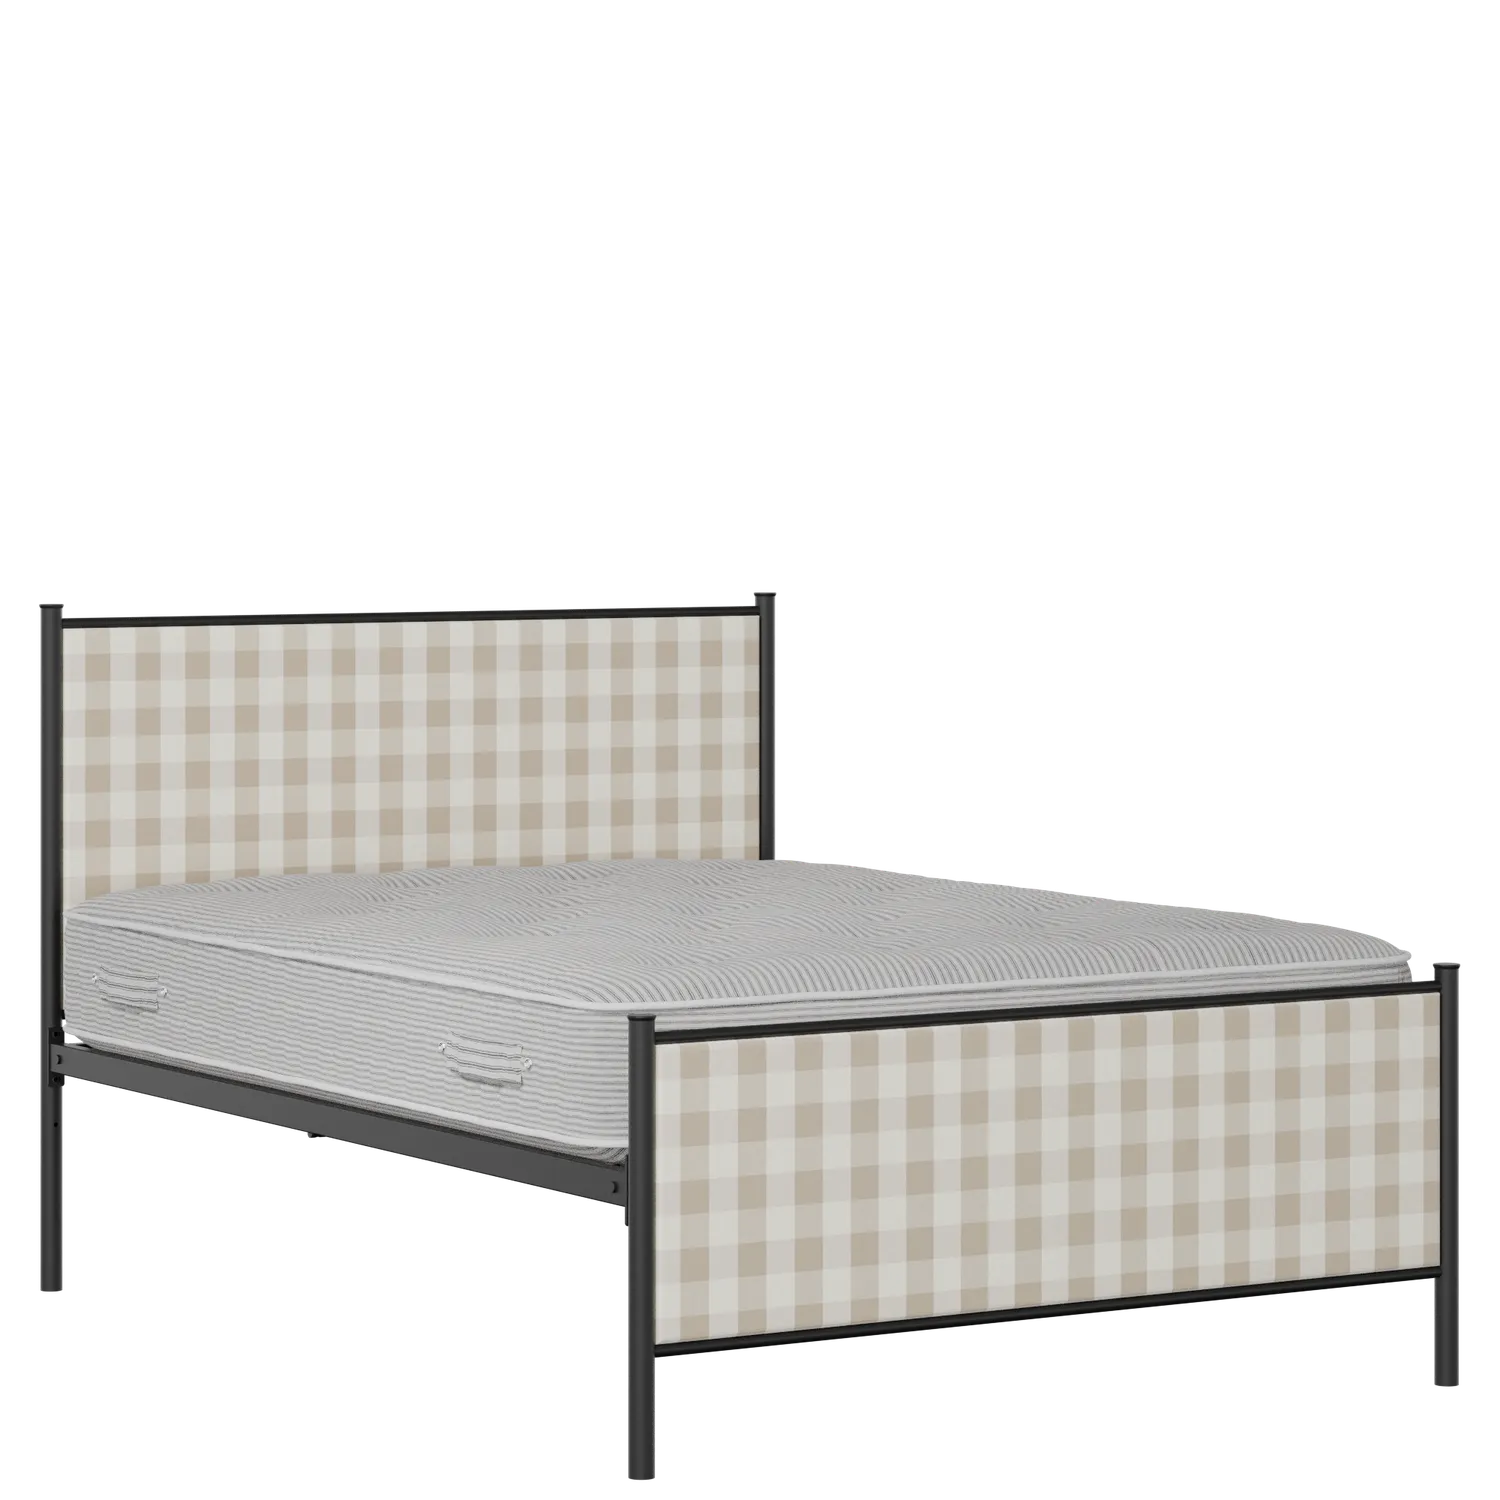 Brest iron/metal upholstered bed in black with Romo Kemble Putty fabric